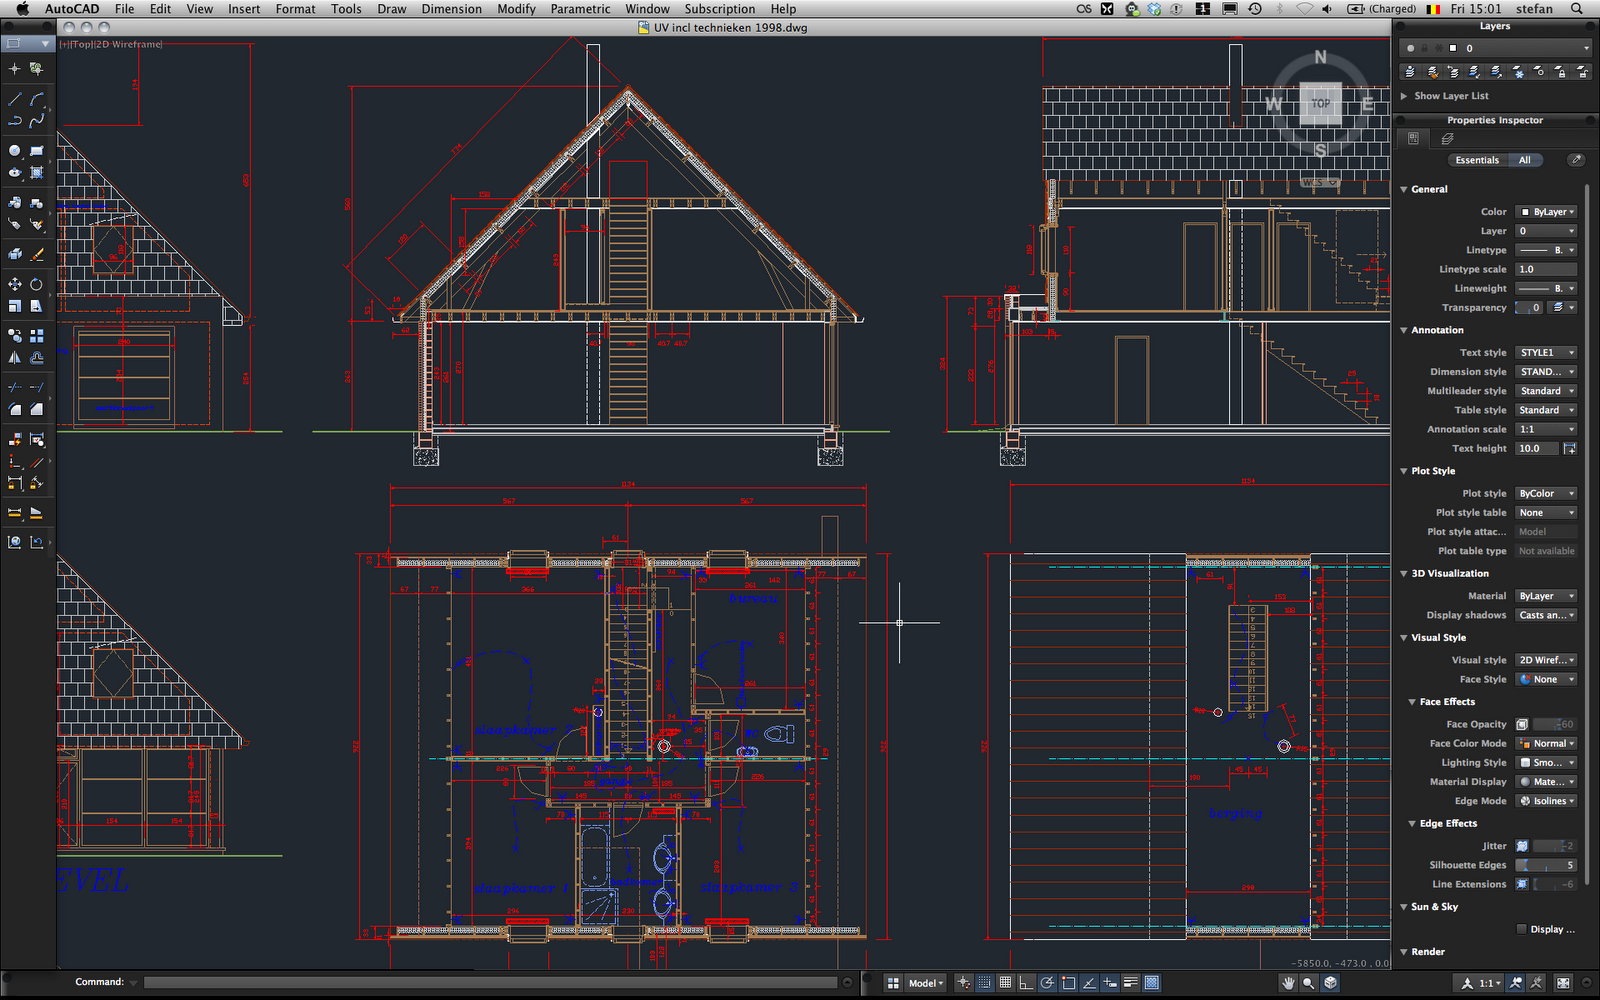 autocad for mac students